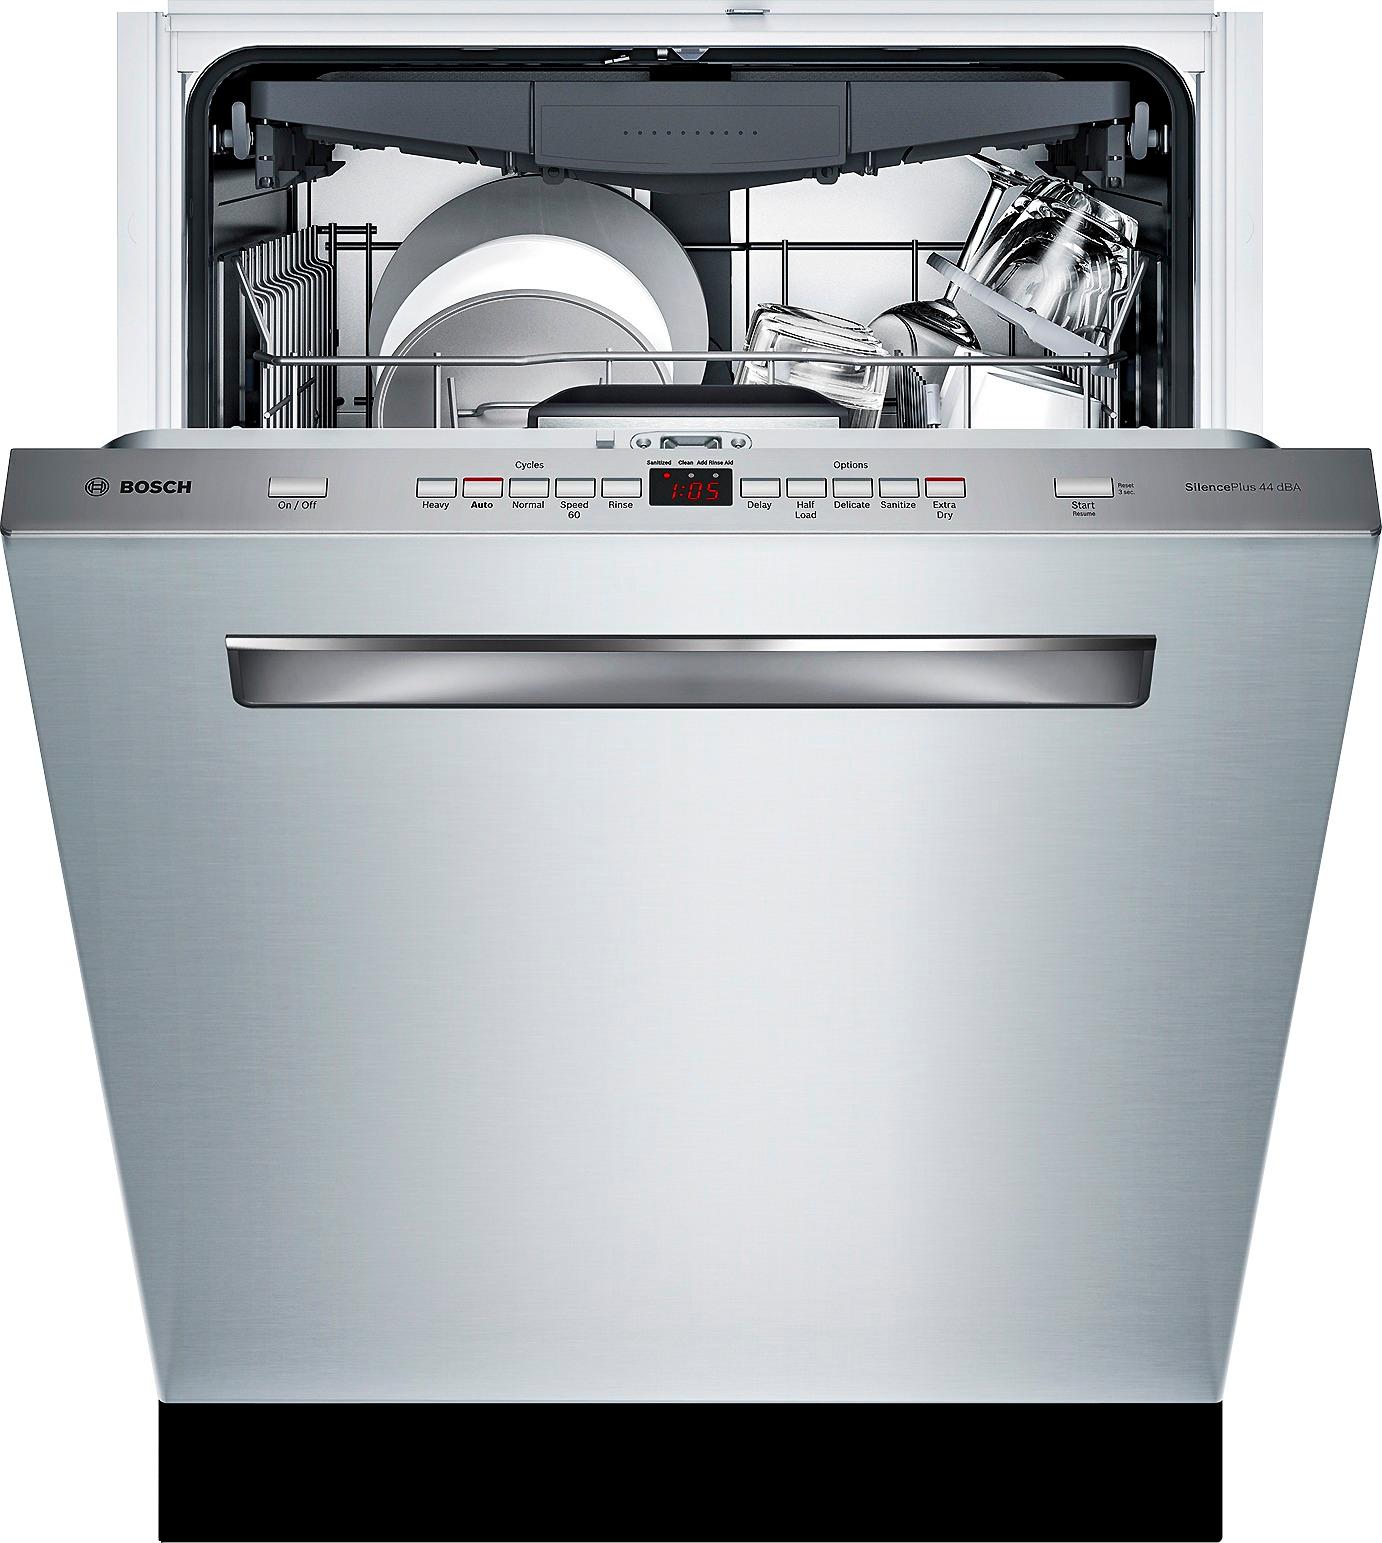 Customer Reviews Bosch 500 Series 24" Pocket Handle Dishwasher with